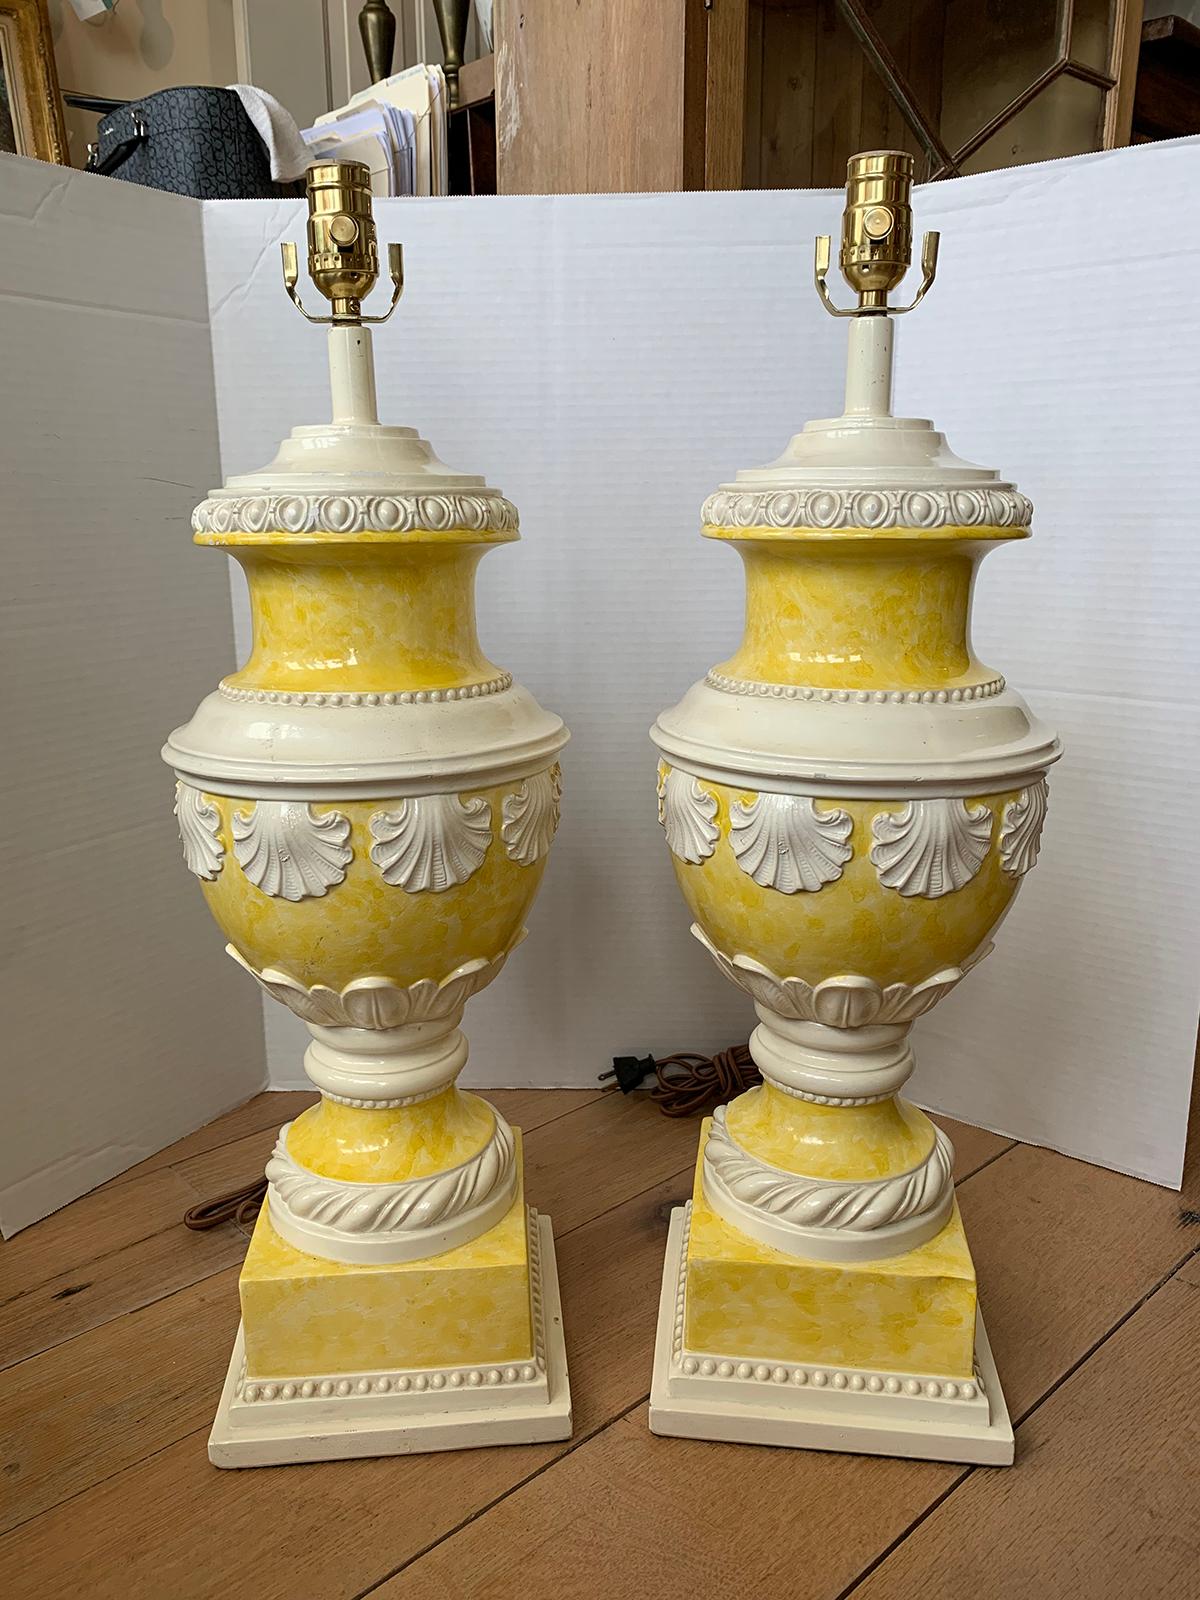 Pair of mid-20th century neoclassical yellow and white glazed urn lamps, shell motif
New wiring.